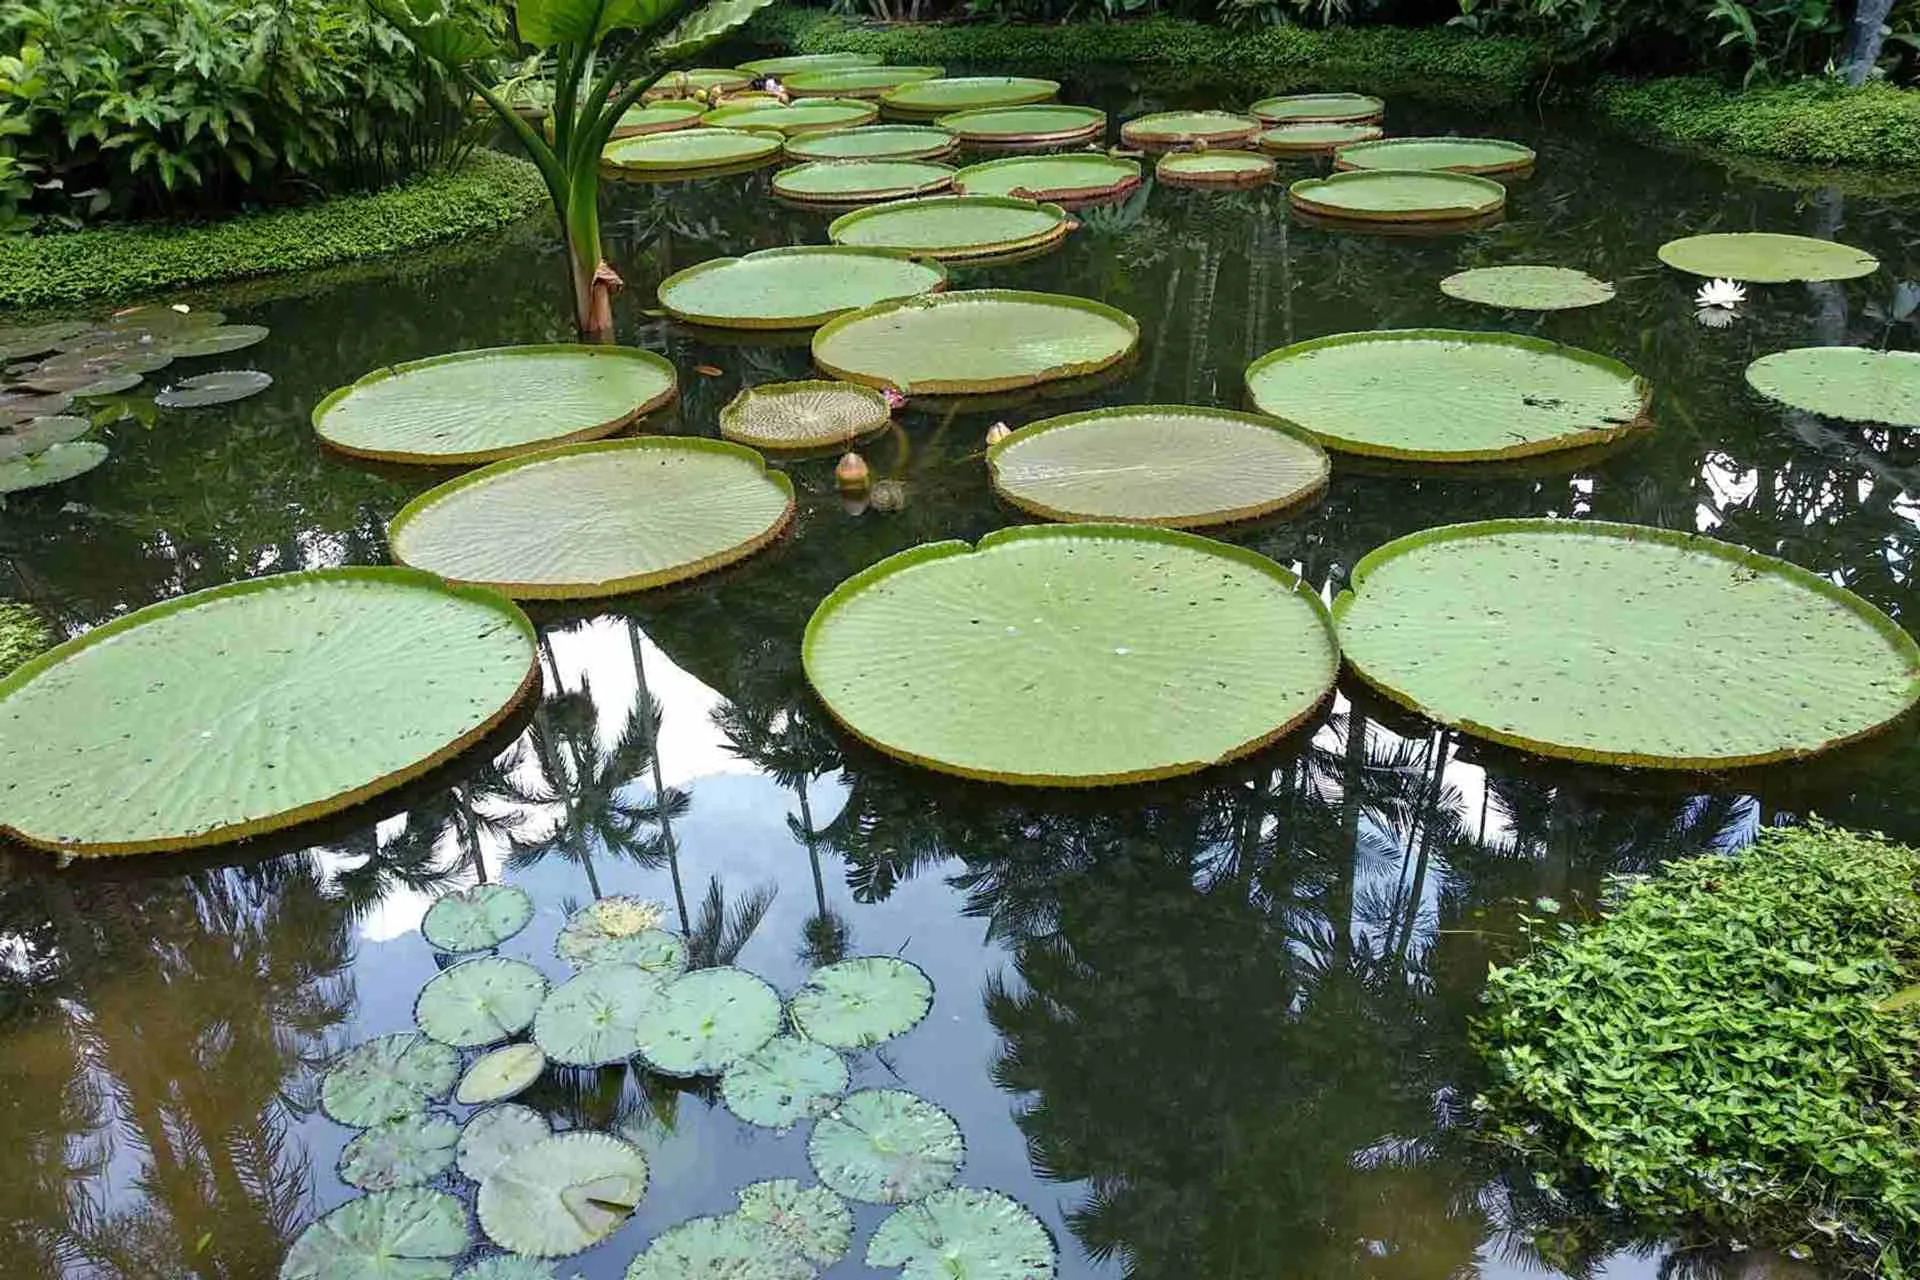 Victoria Amazonica - Giant water lilies